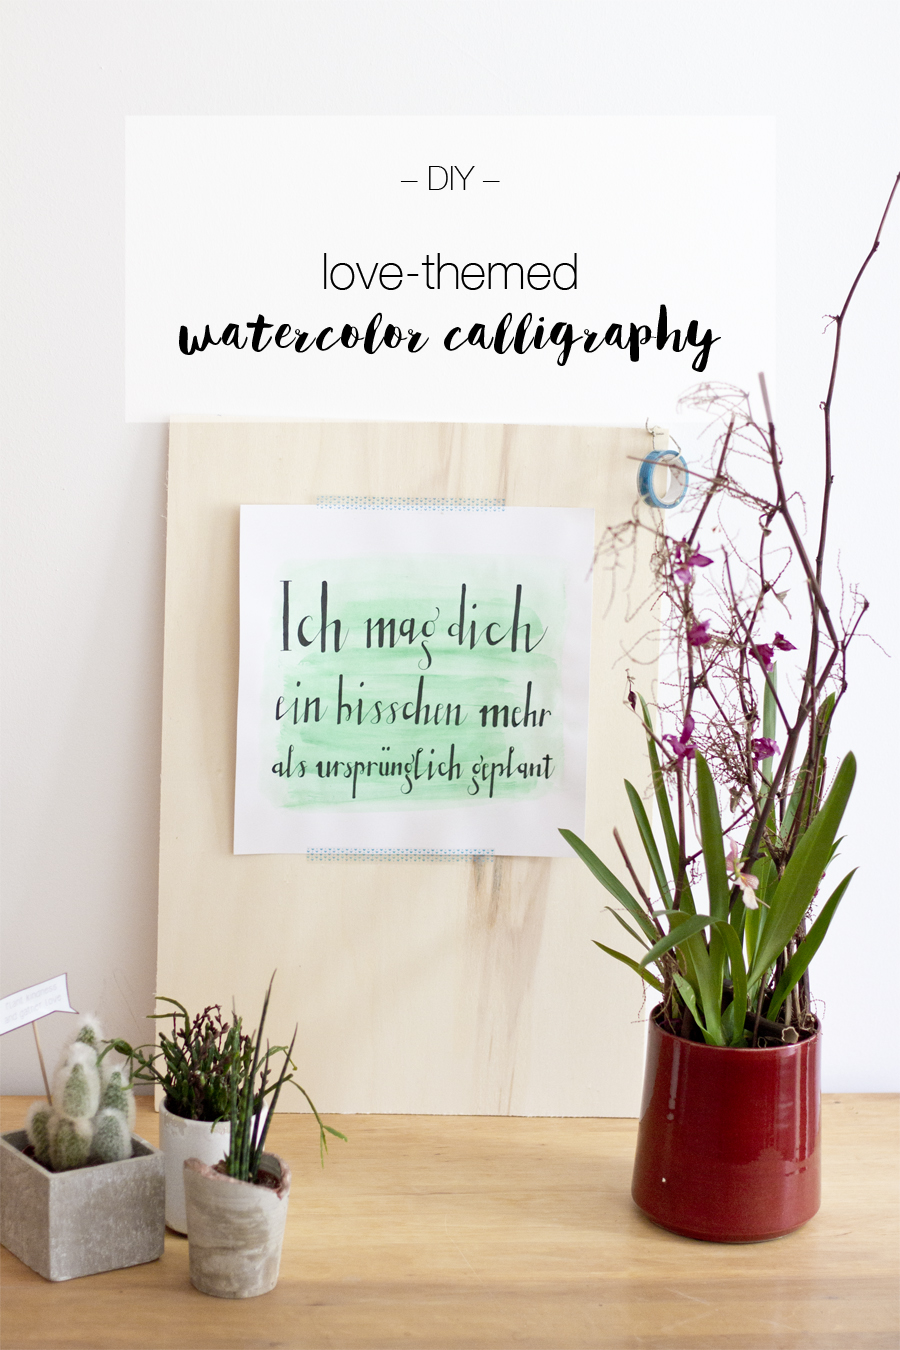 Love-themed faux watercolor calligraphy | LOOK WHAT I MADE ...